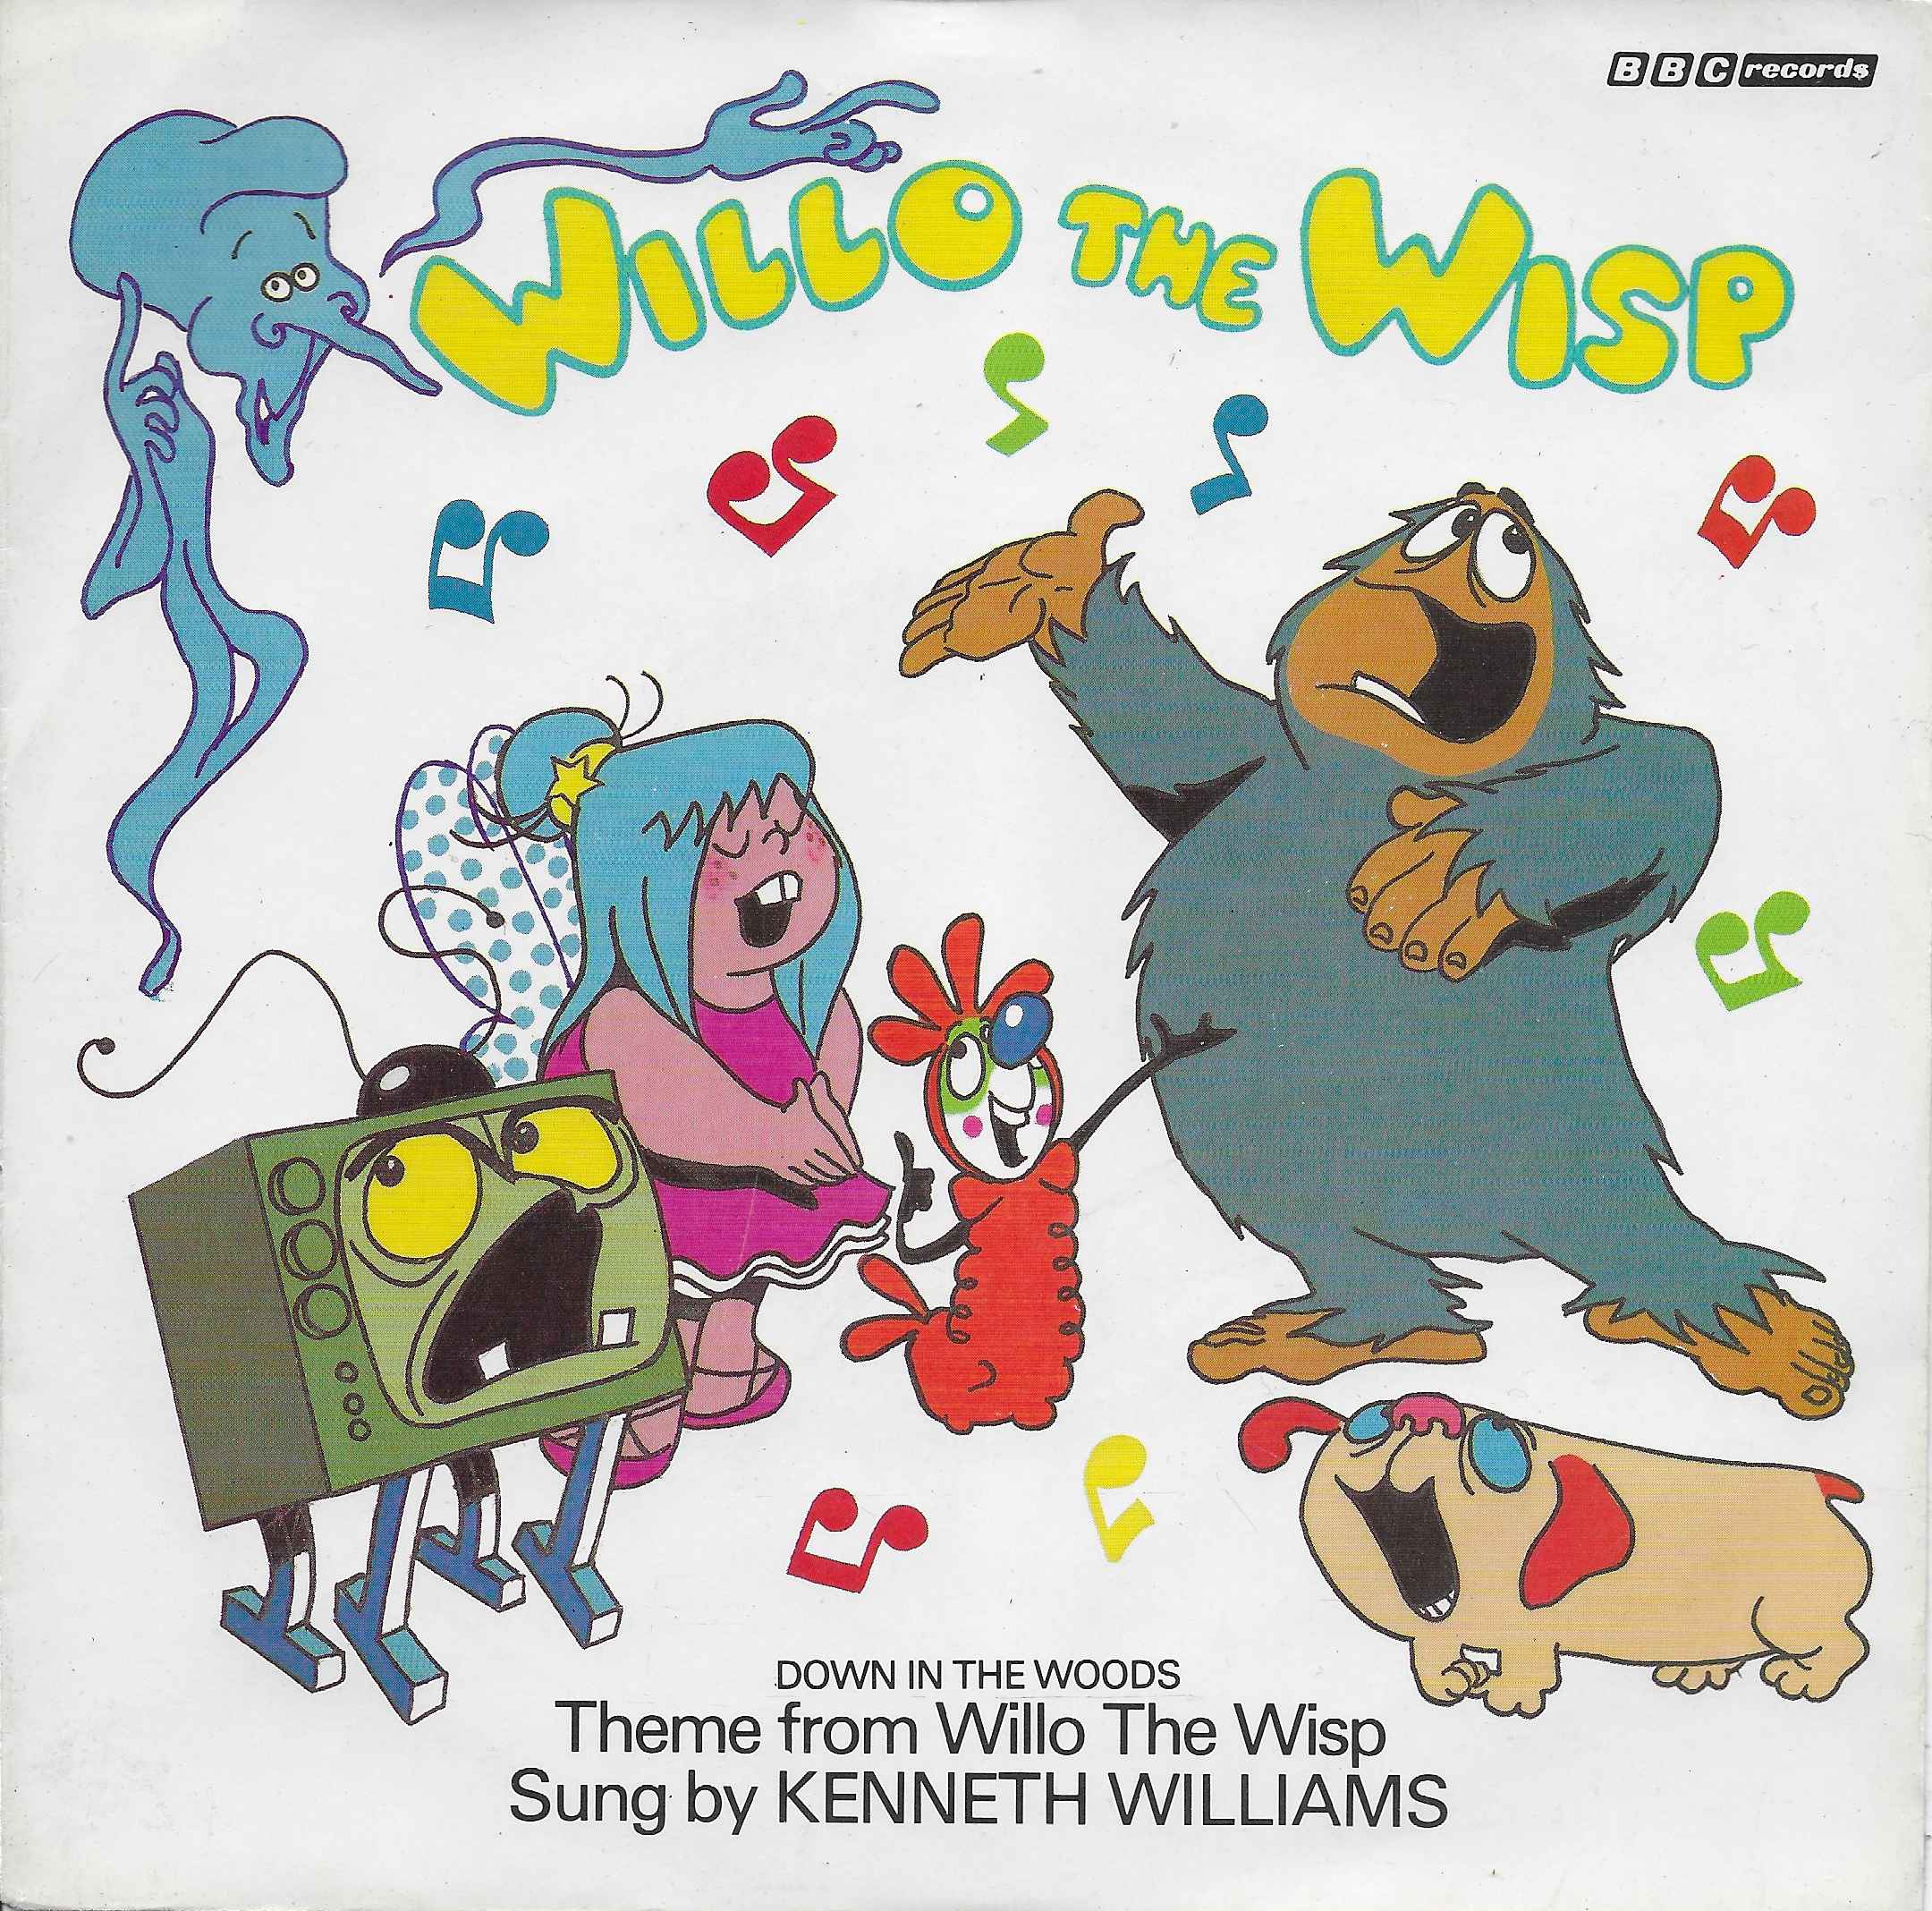 Picture of RESL 136 Down in the woods (Willo the Wisp) by artist Nick Spargo / Tony Kinsey / Kenneth Williams from the BBC records and Tapes library